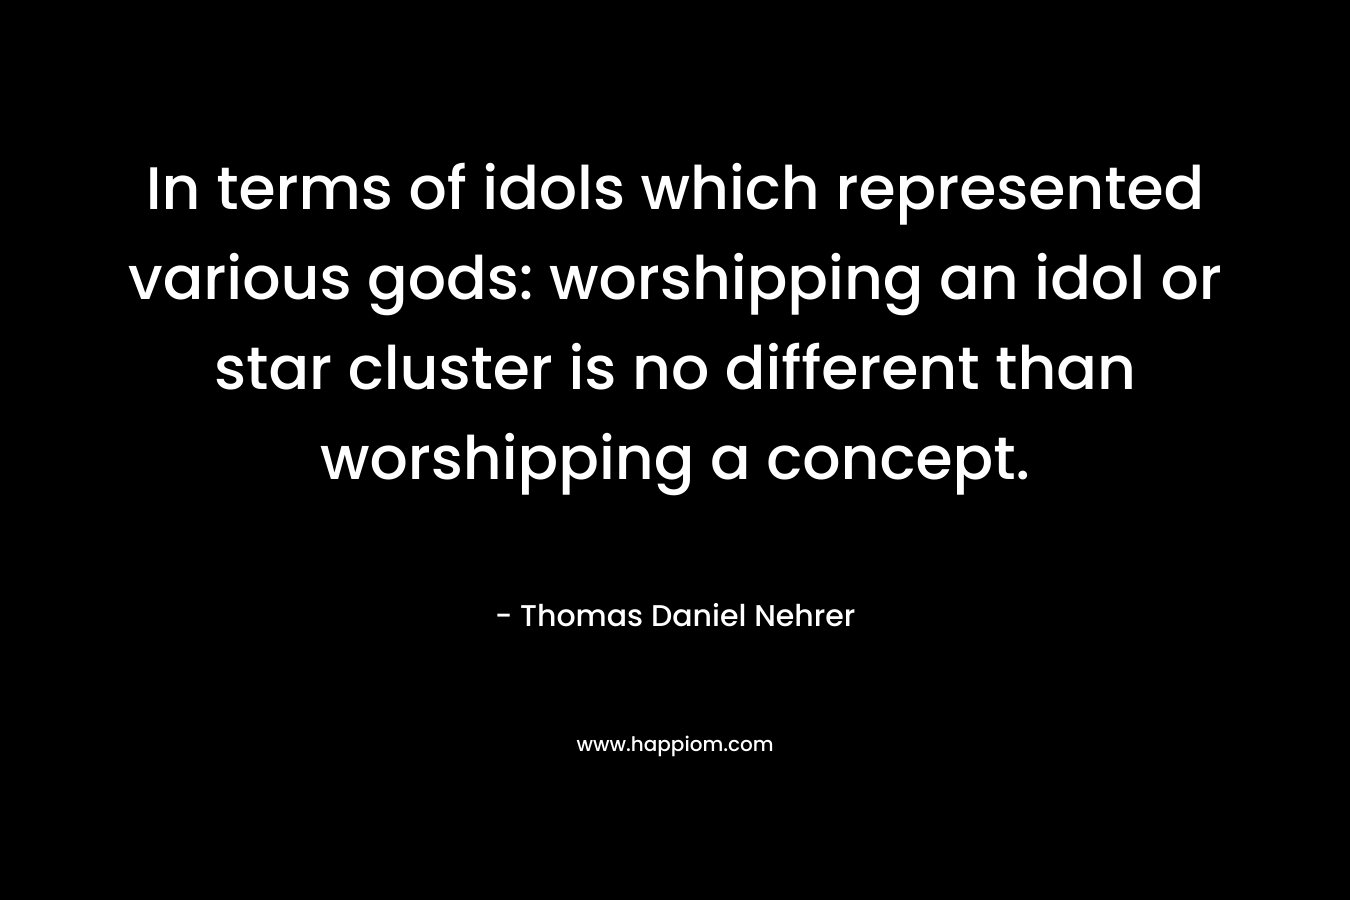 In terms of idols which represented various gods: worshipping an idol or star cluster is no different than worshipping a concept.